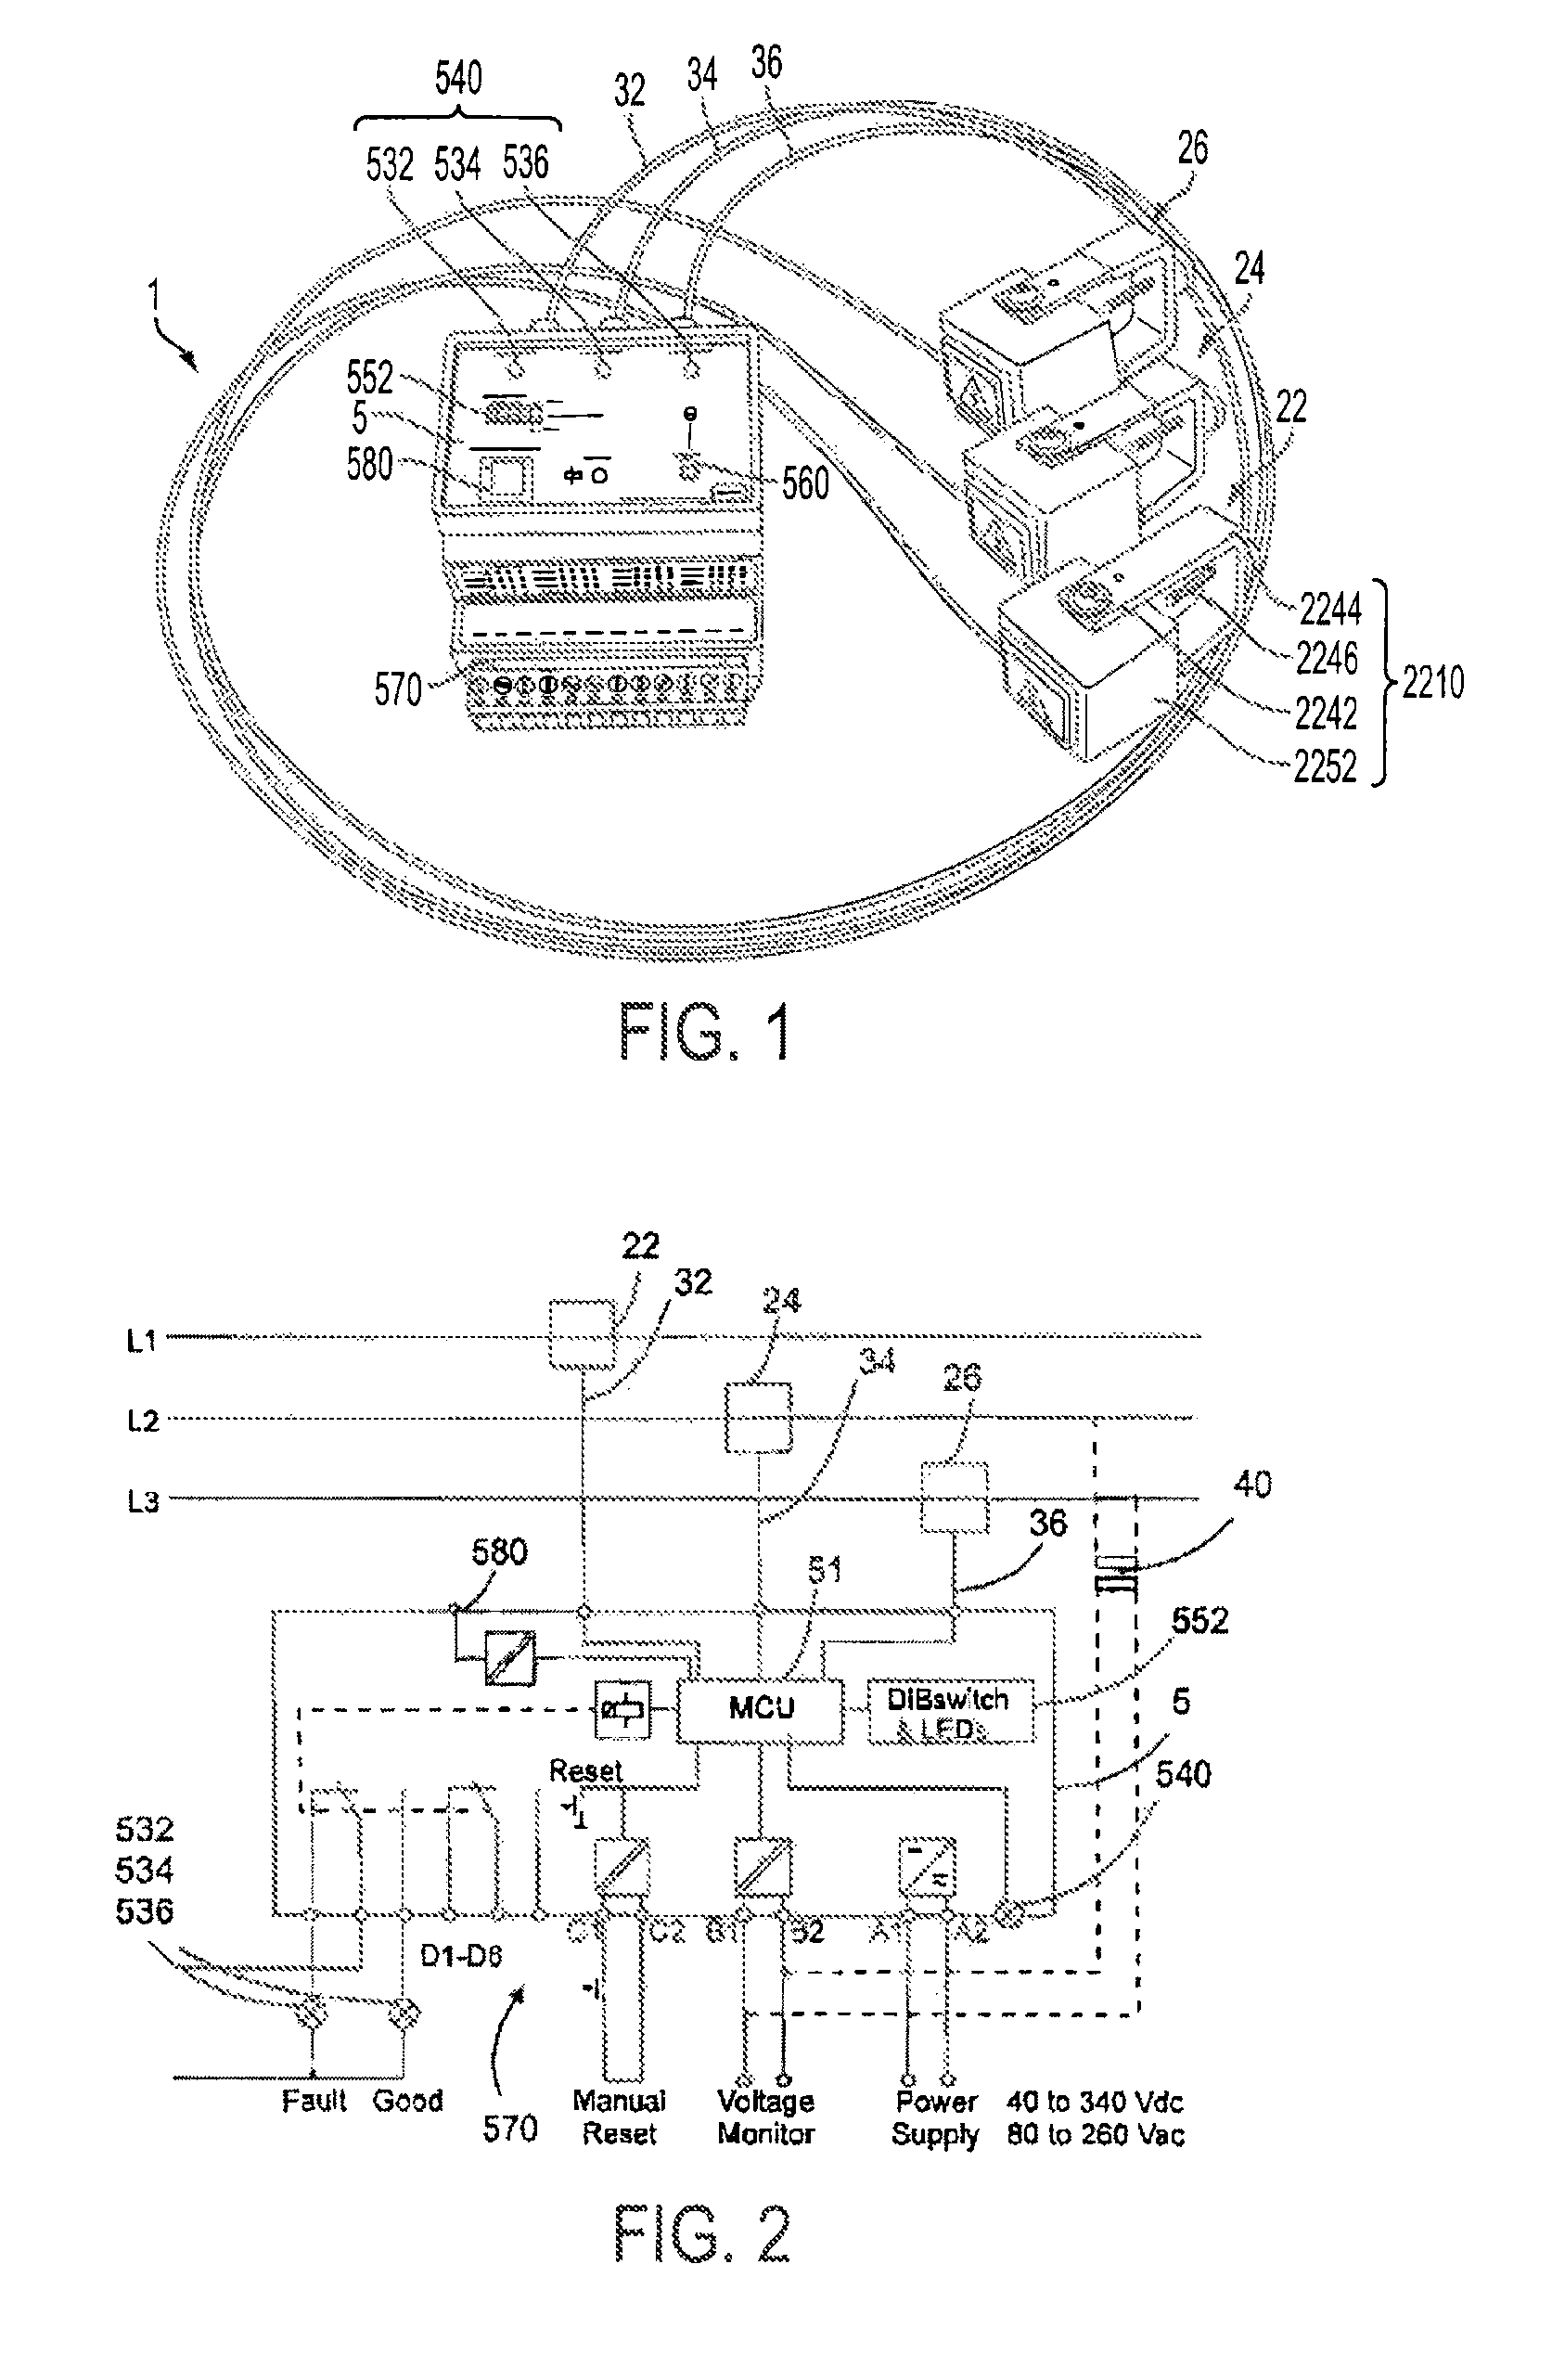 AC current sensor for measuring electric AC current in a conductor and an indicator system comprising such a sensor